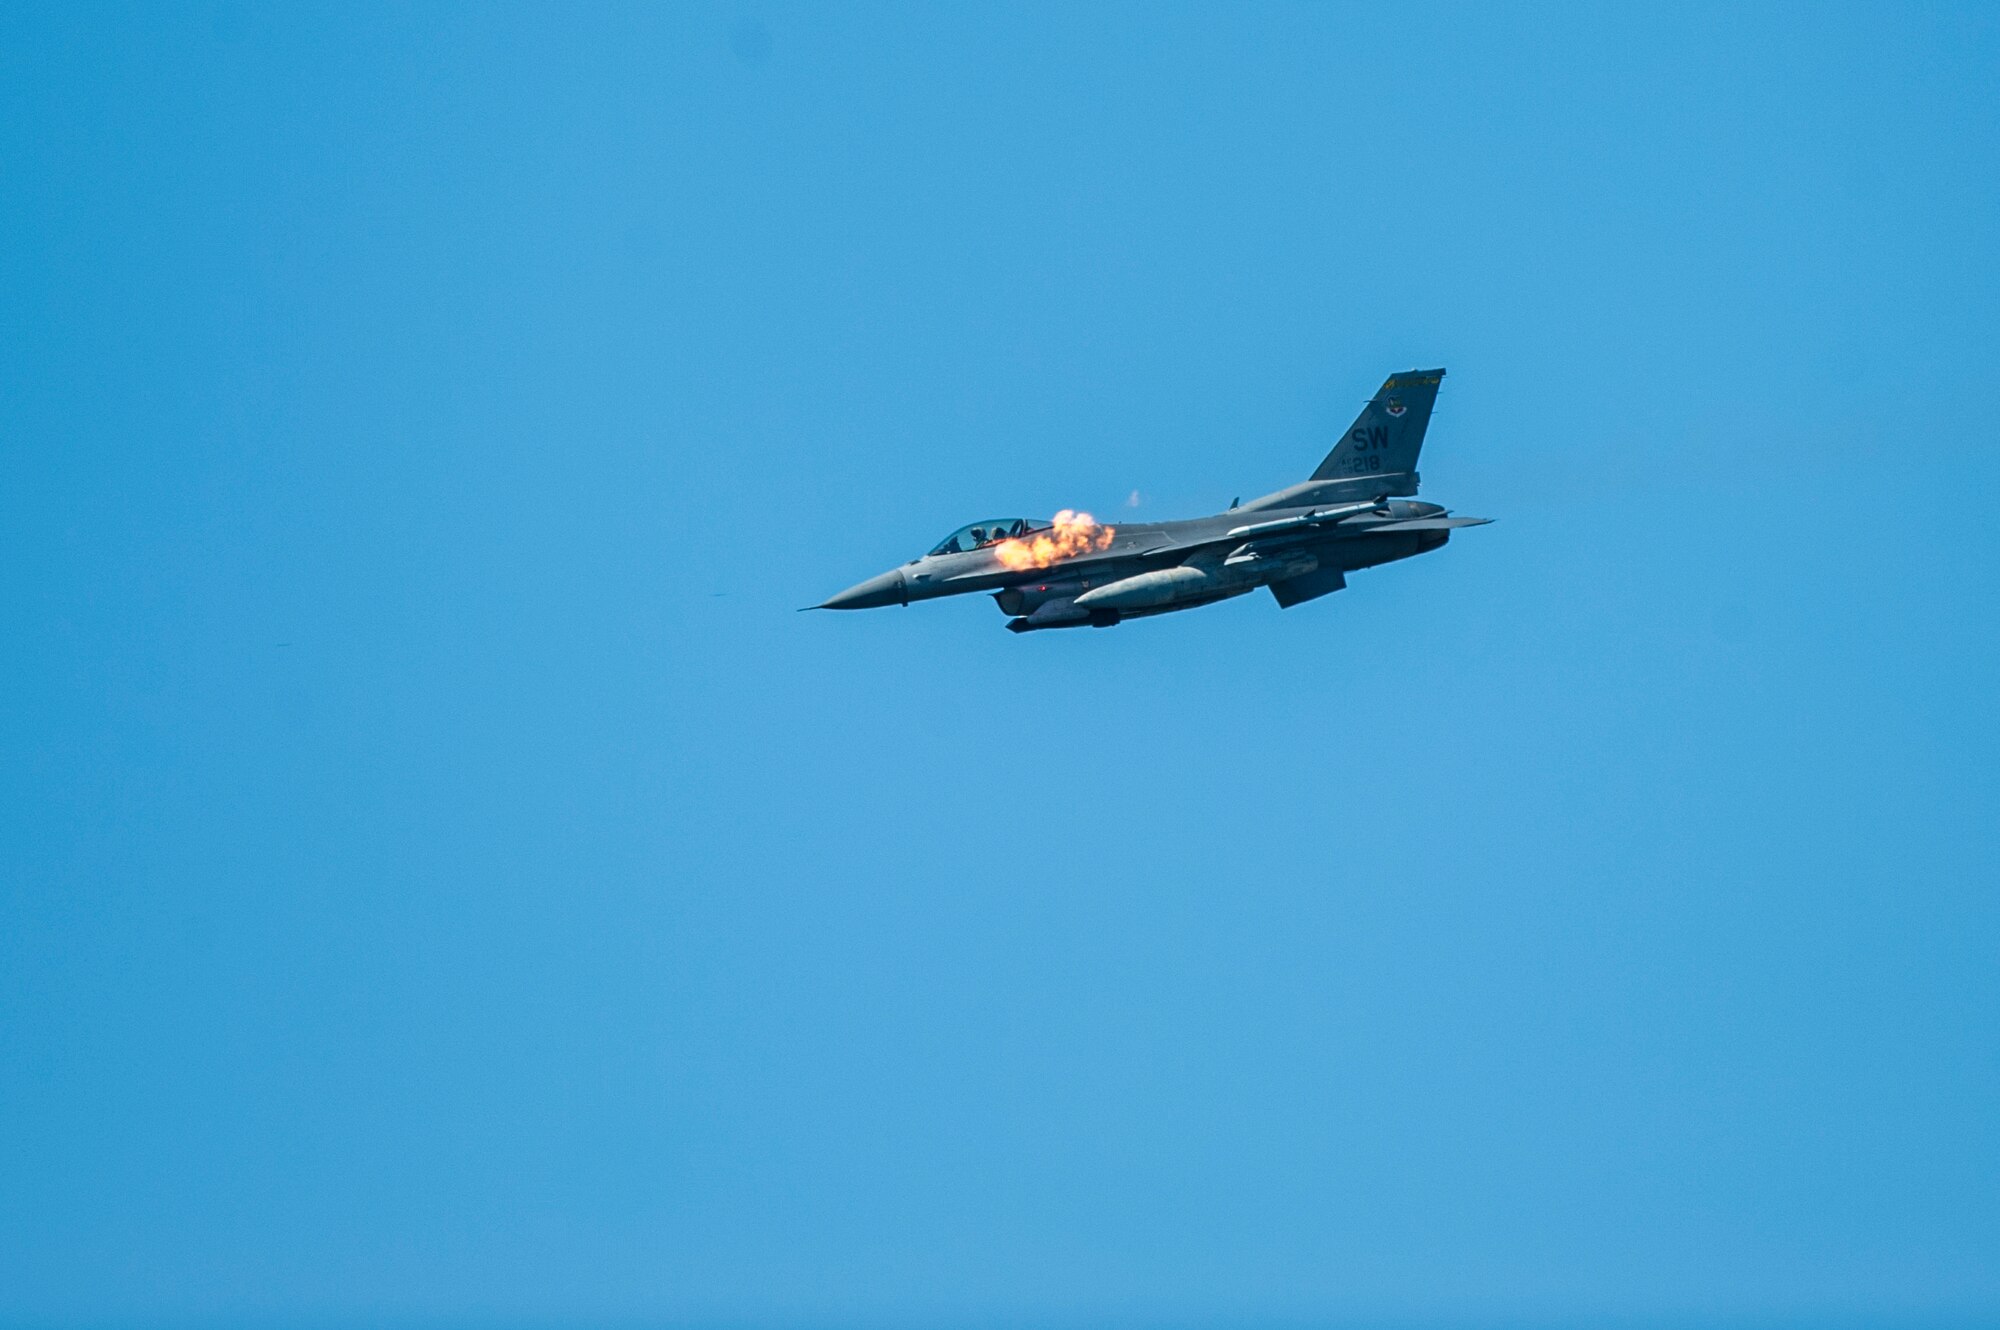 An F-16 Fighting Falcon fires at a target during a training exercise, Feb.18, 2016, at Moody Air Force Base, Ga. During the training, the aircraft conducted tactical air and ground maneuvers, as well as weapons training. (U.S. Air Force photo by Airman 1st Class Lauren M. Johnson/Released)